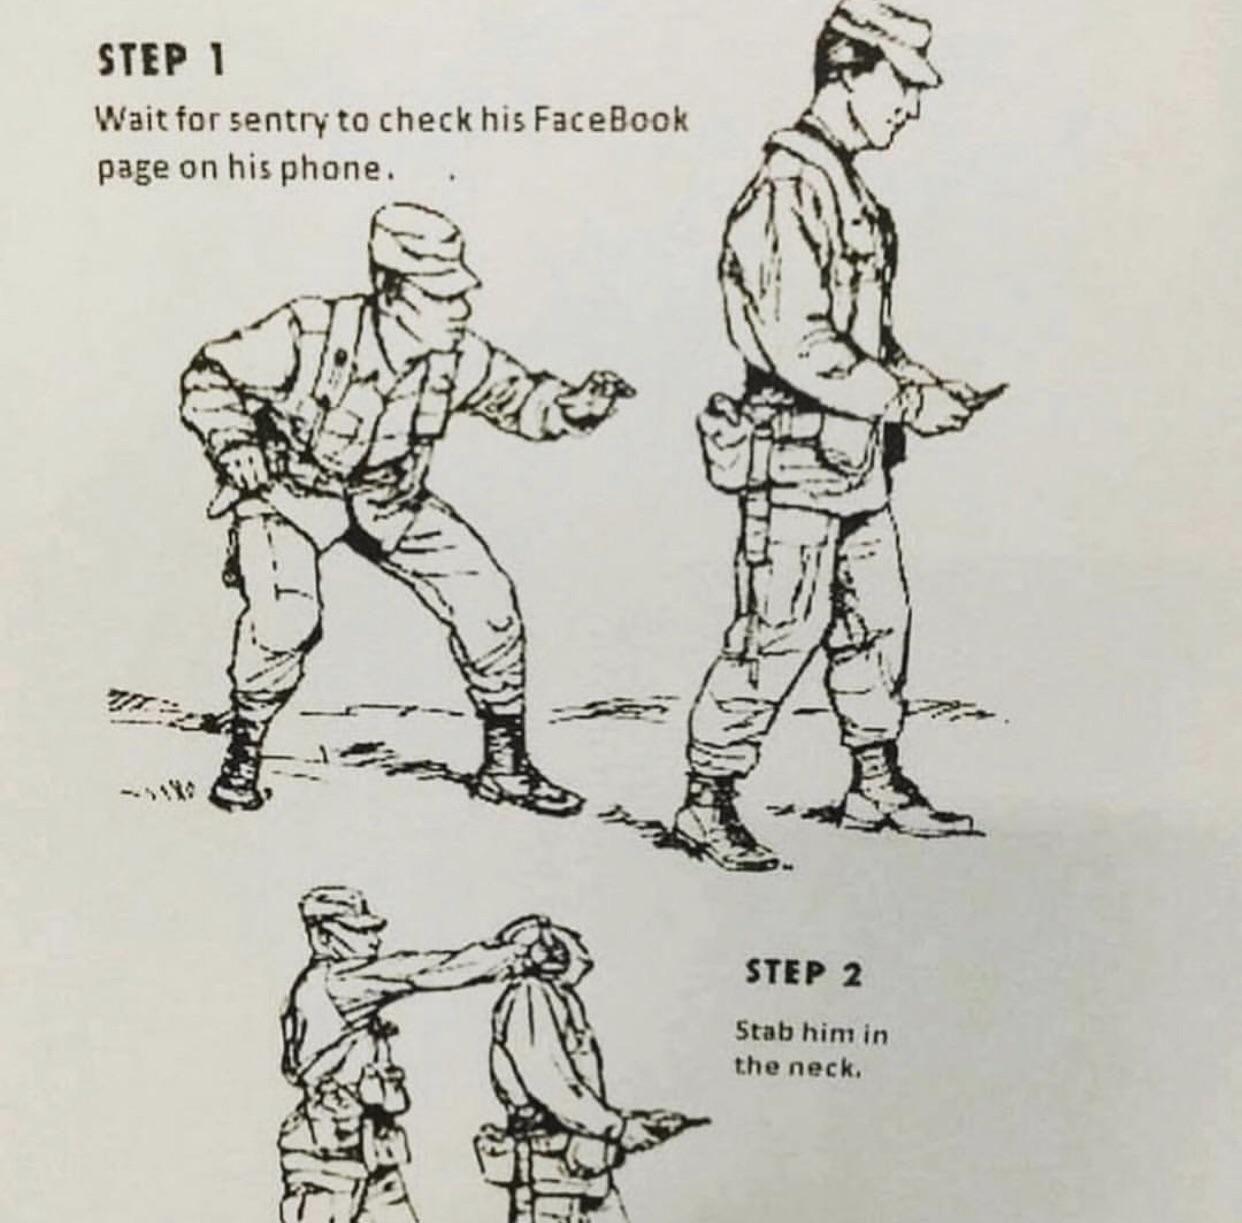 A newer revised Army combat manual. LOL